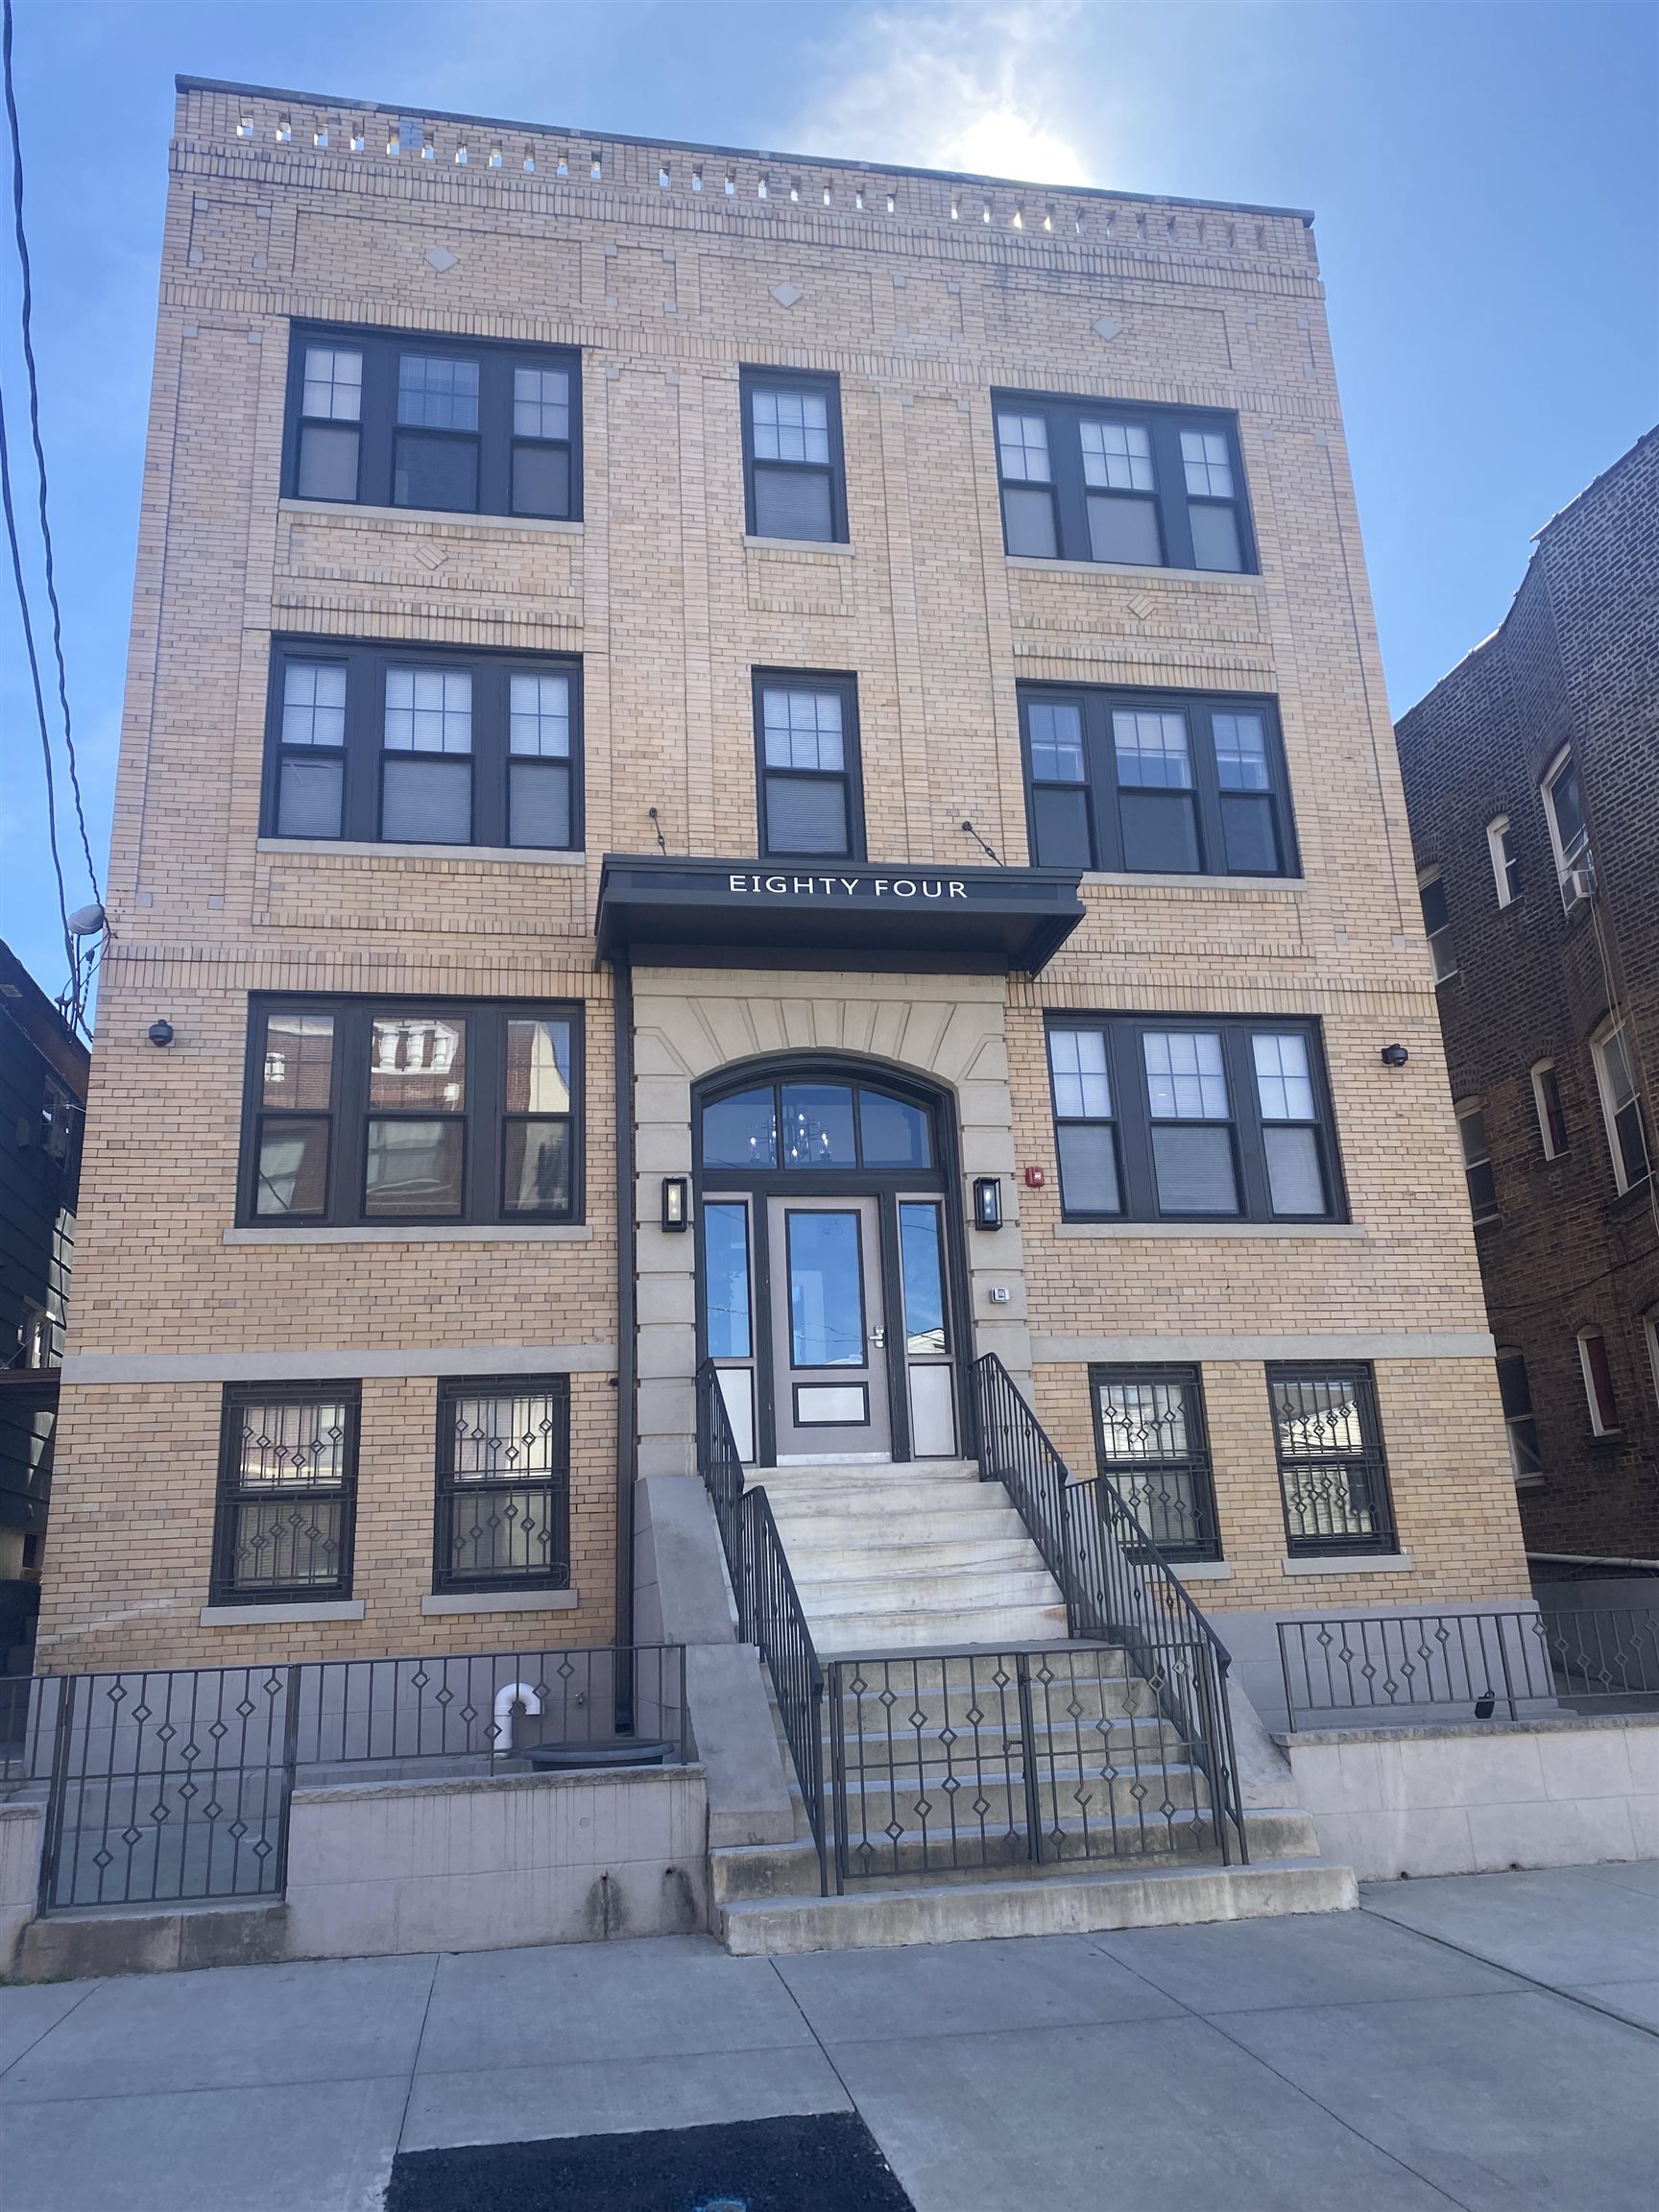 # 240006751 - For Rent in JERSEY CITY - Journal Square NJ